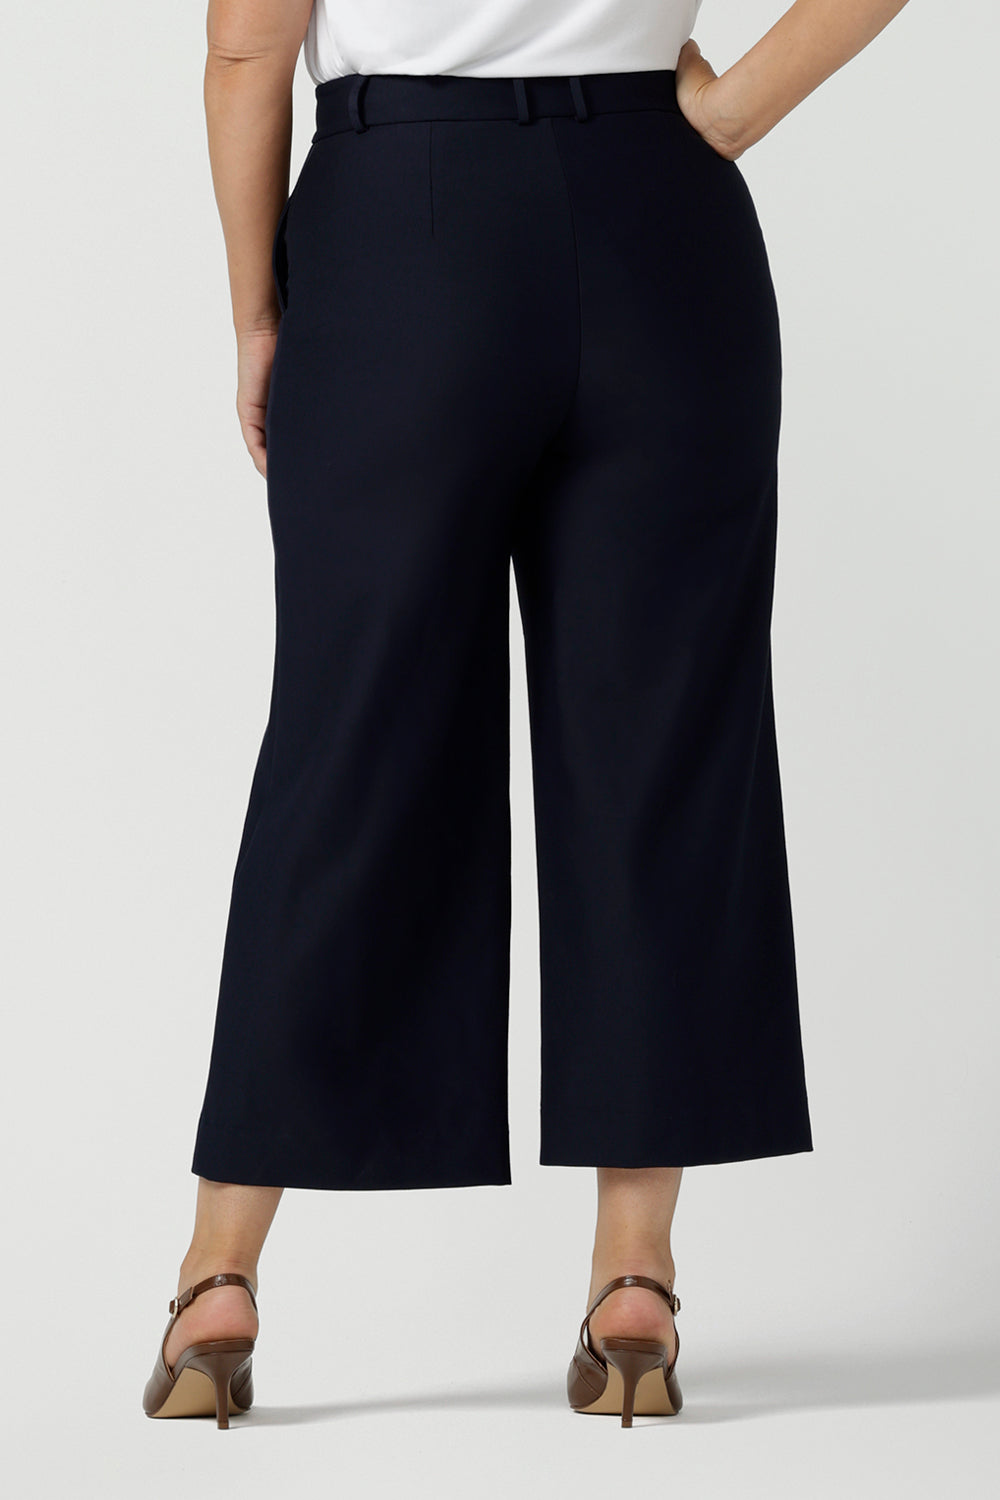 Back view of the Yael Pant in Navy Ponte. Tailored high waist pants with pockets and front zip. Cropped culotte length and styled back with white bamboo top. Made in Australia for women size 8 - 24.